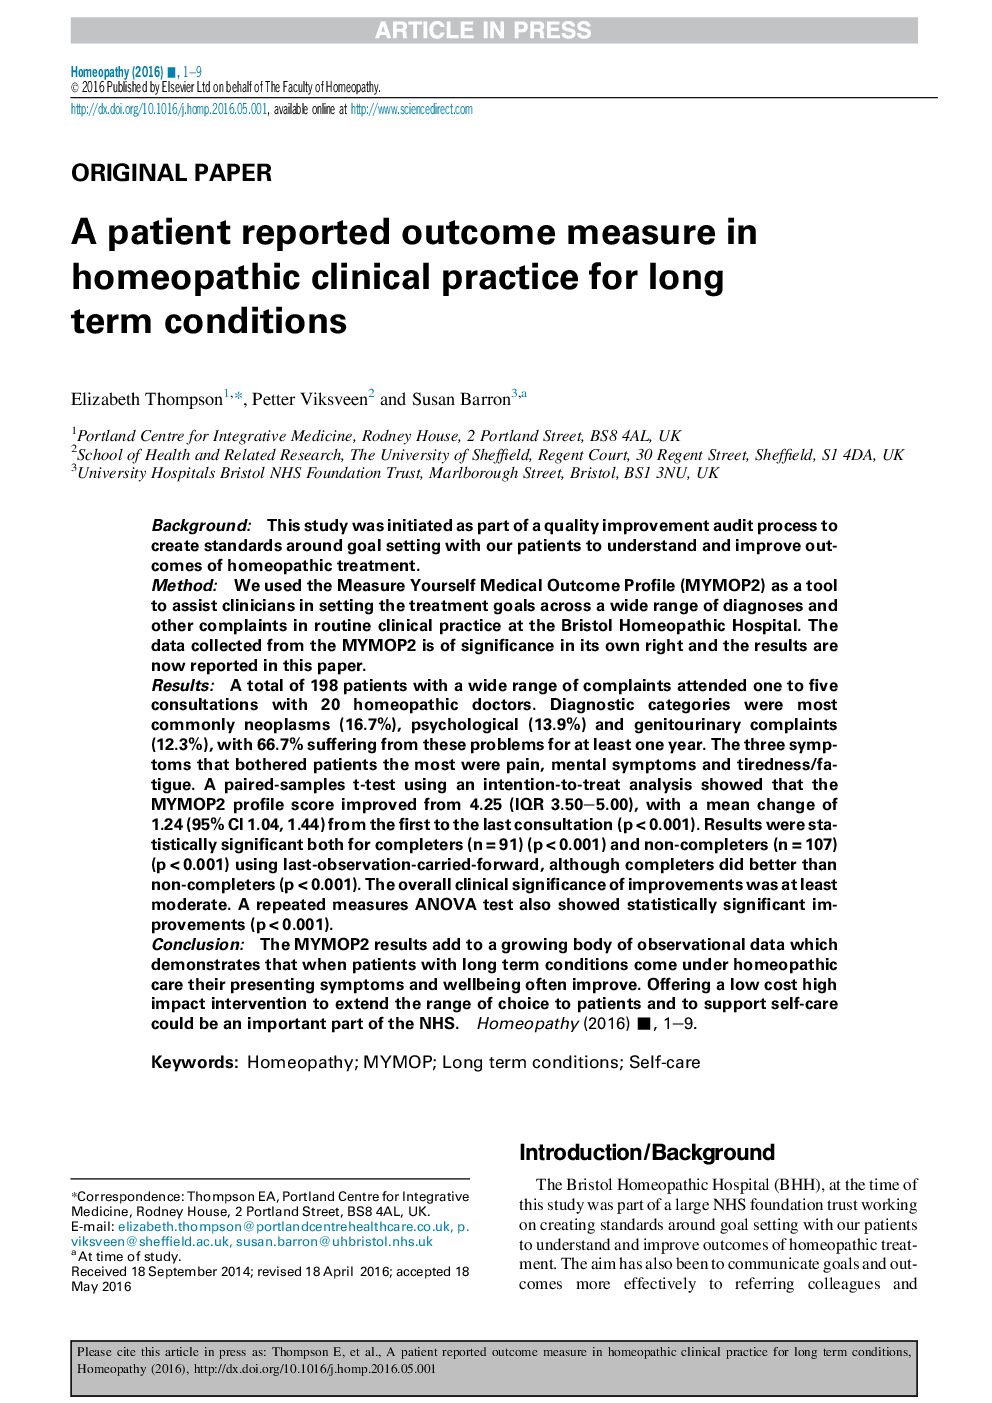 A patient reported outcome measure in homeopathic clinical practice for long-term conditions